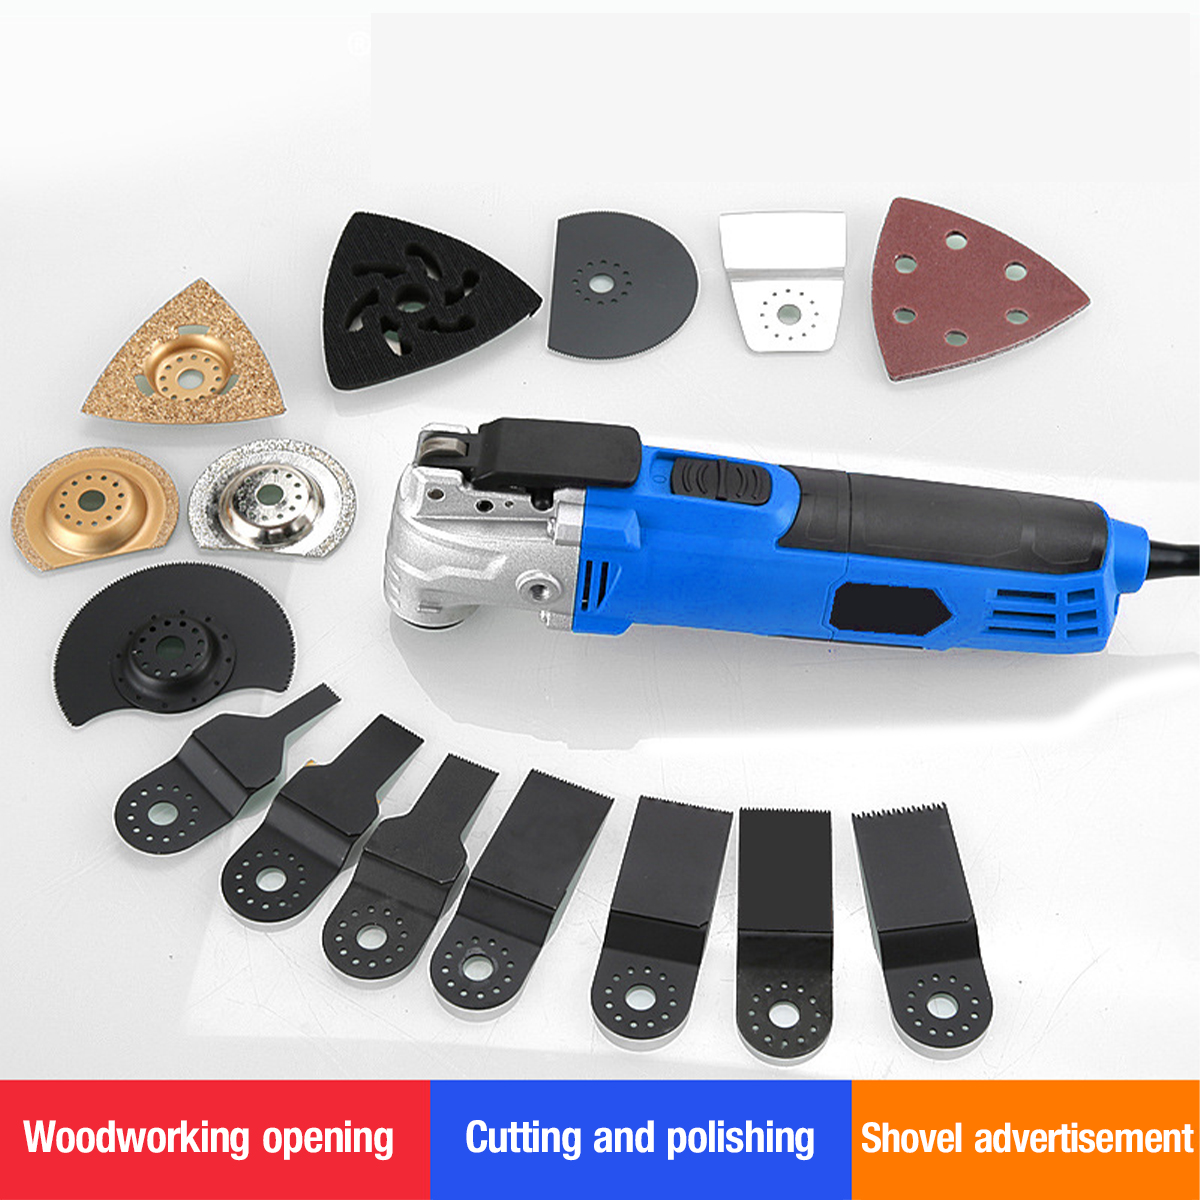 220V-Electric-Polisher-Cutter-Trimmer-Electric-Saw-Renovator-Tool-Woodworking-Oscillating-Tool-1800975-10